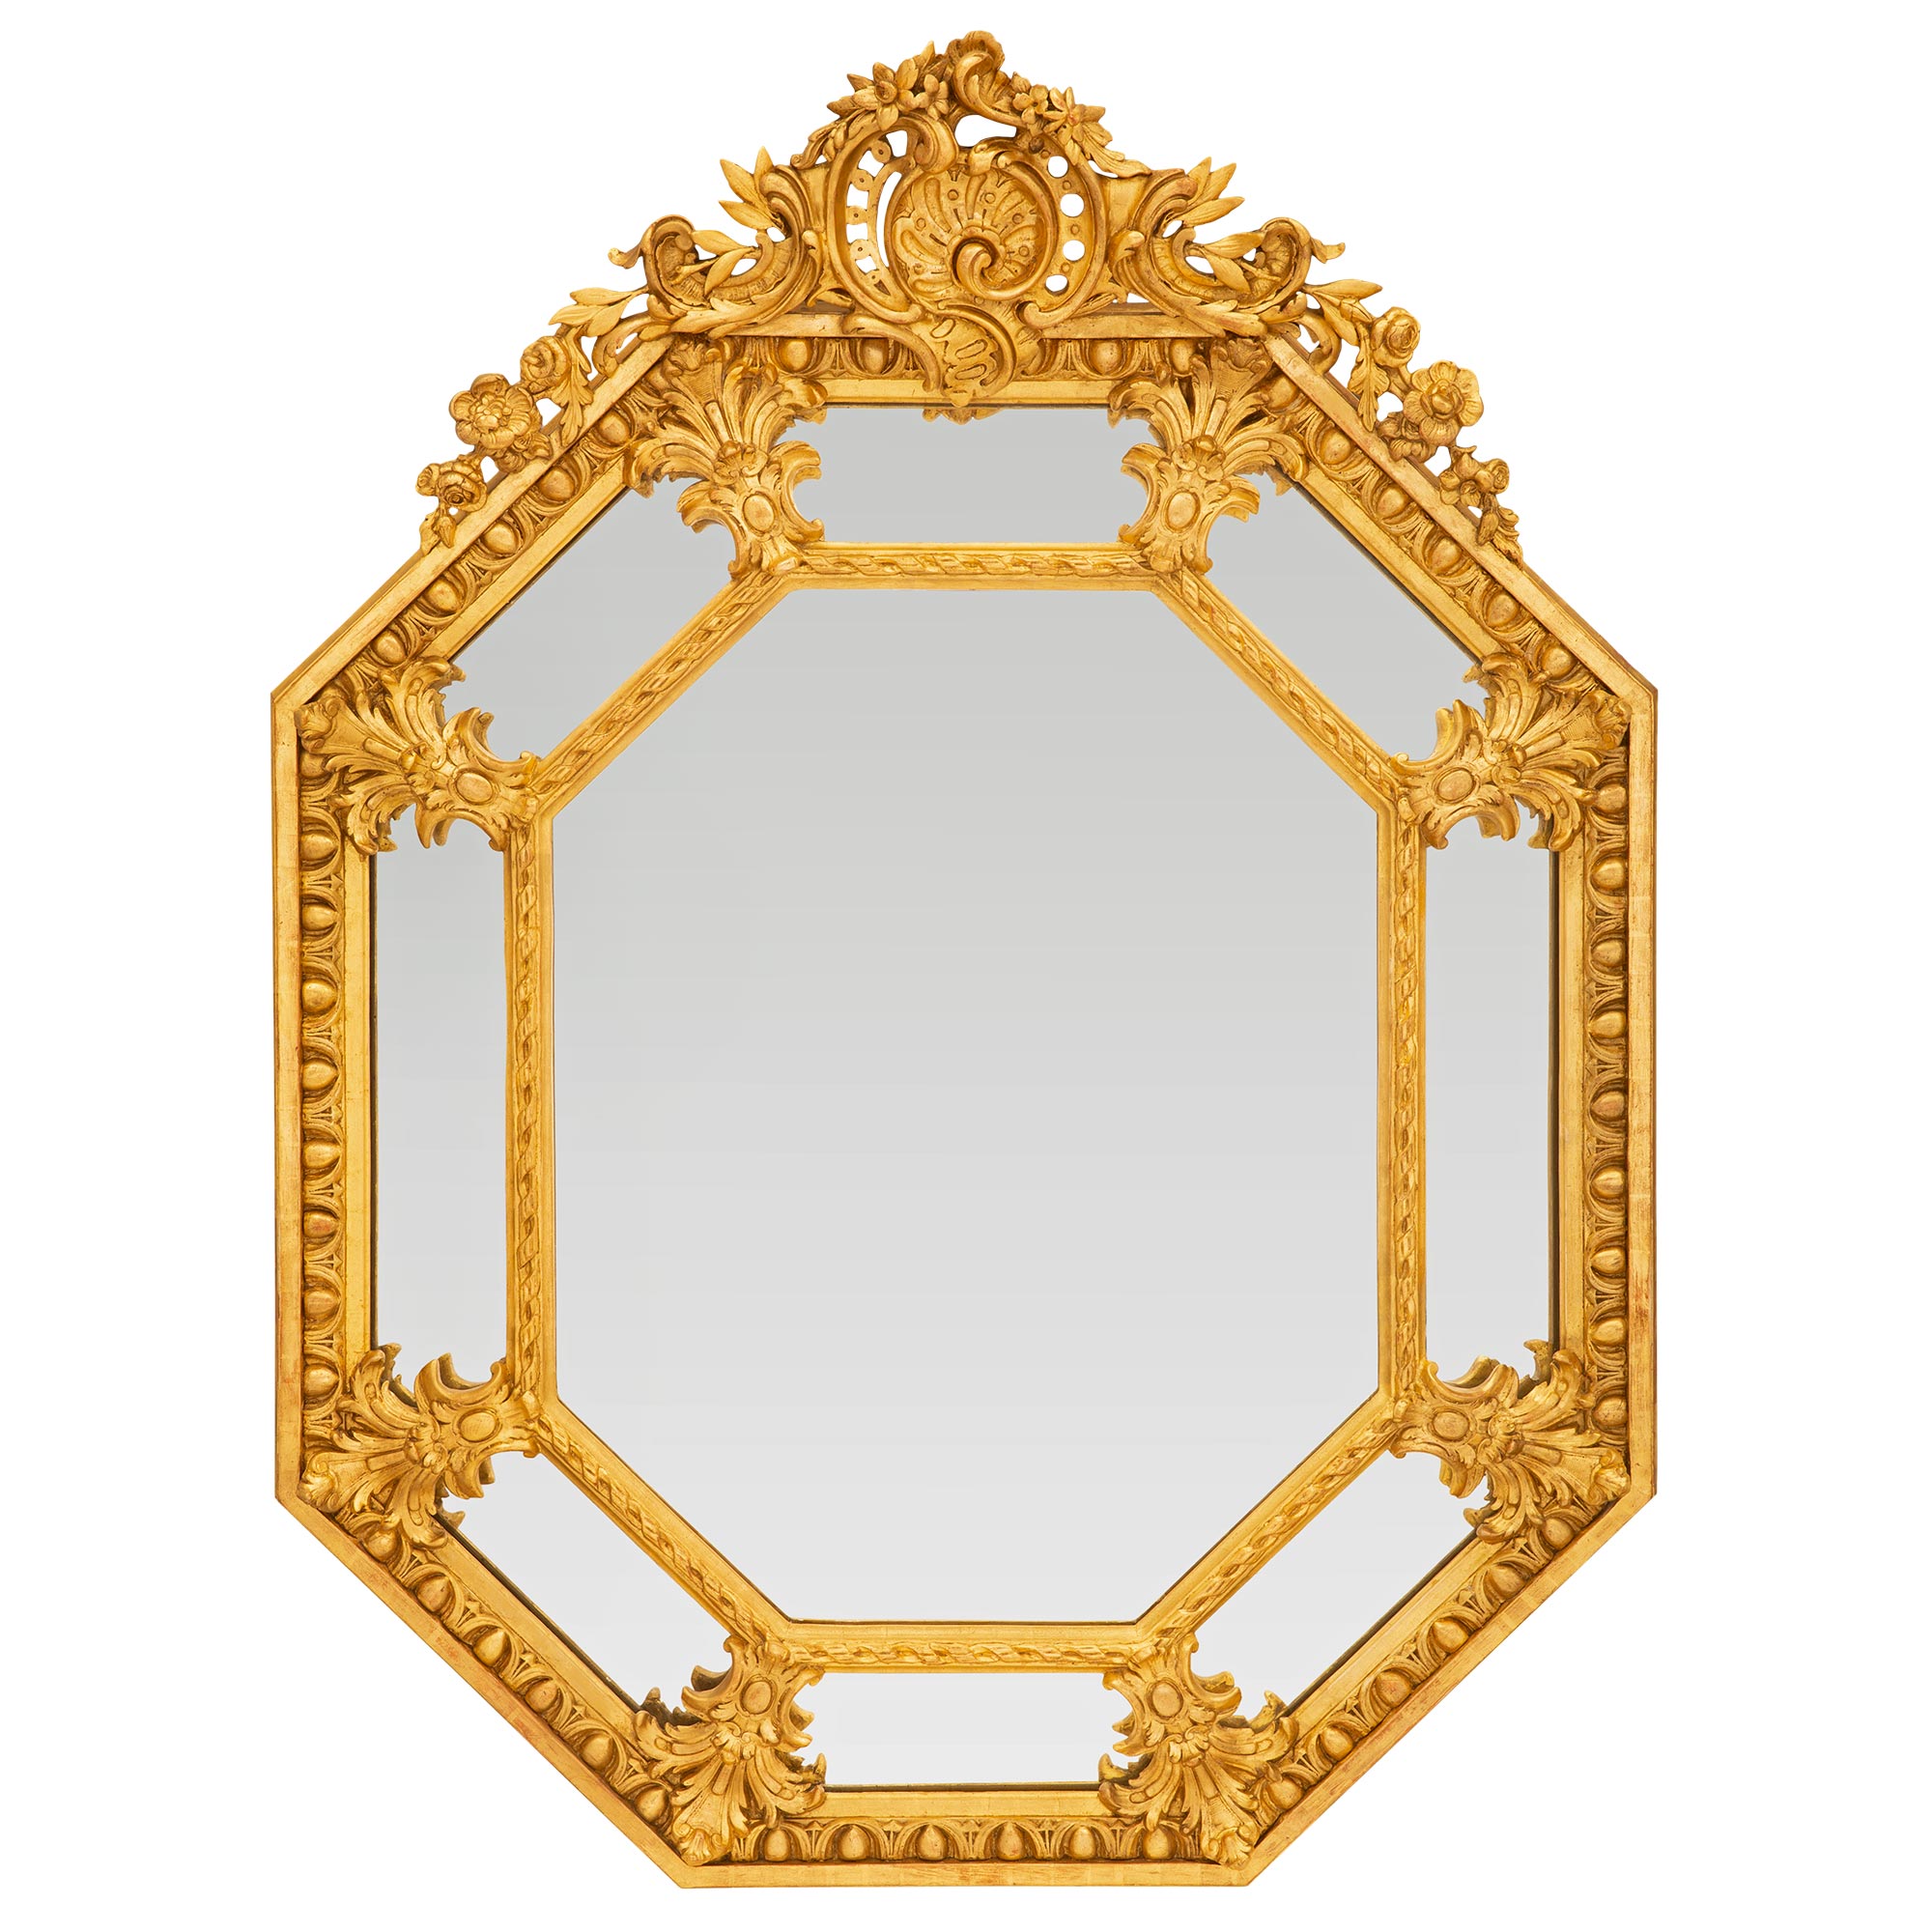 A French 19th century Louis XVI st. double framed octagonal giltwood mirror